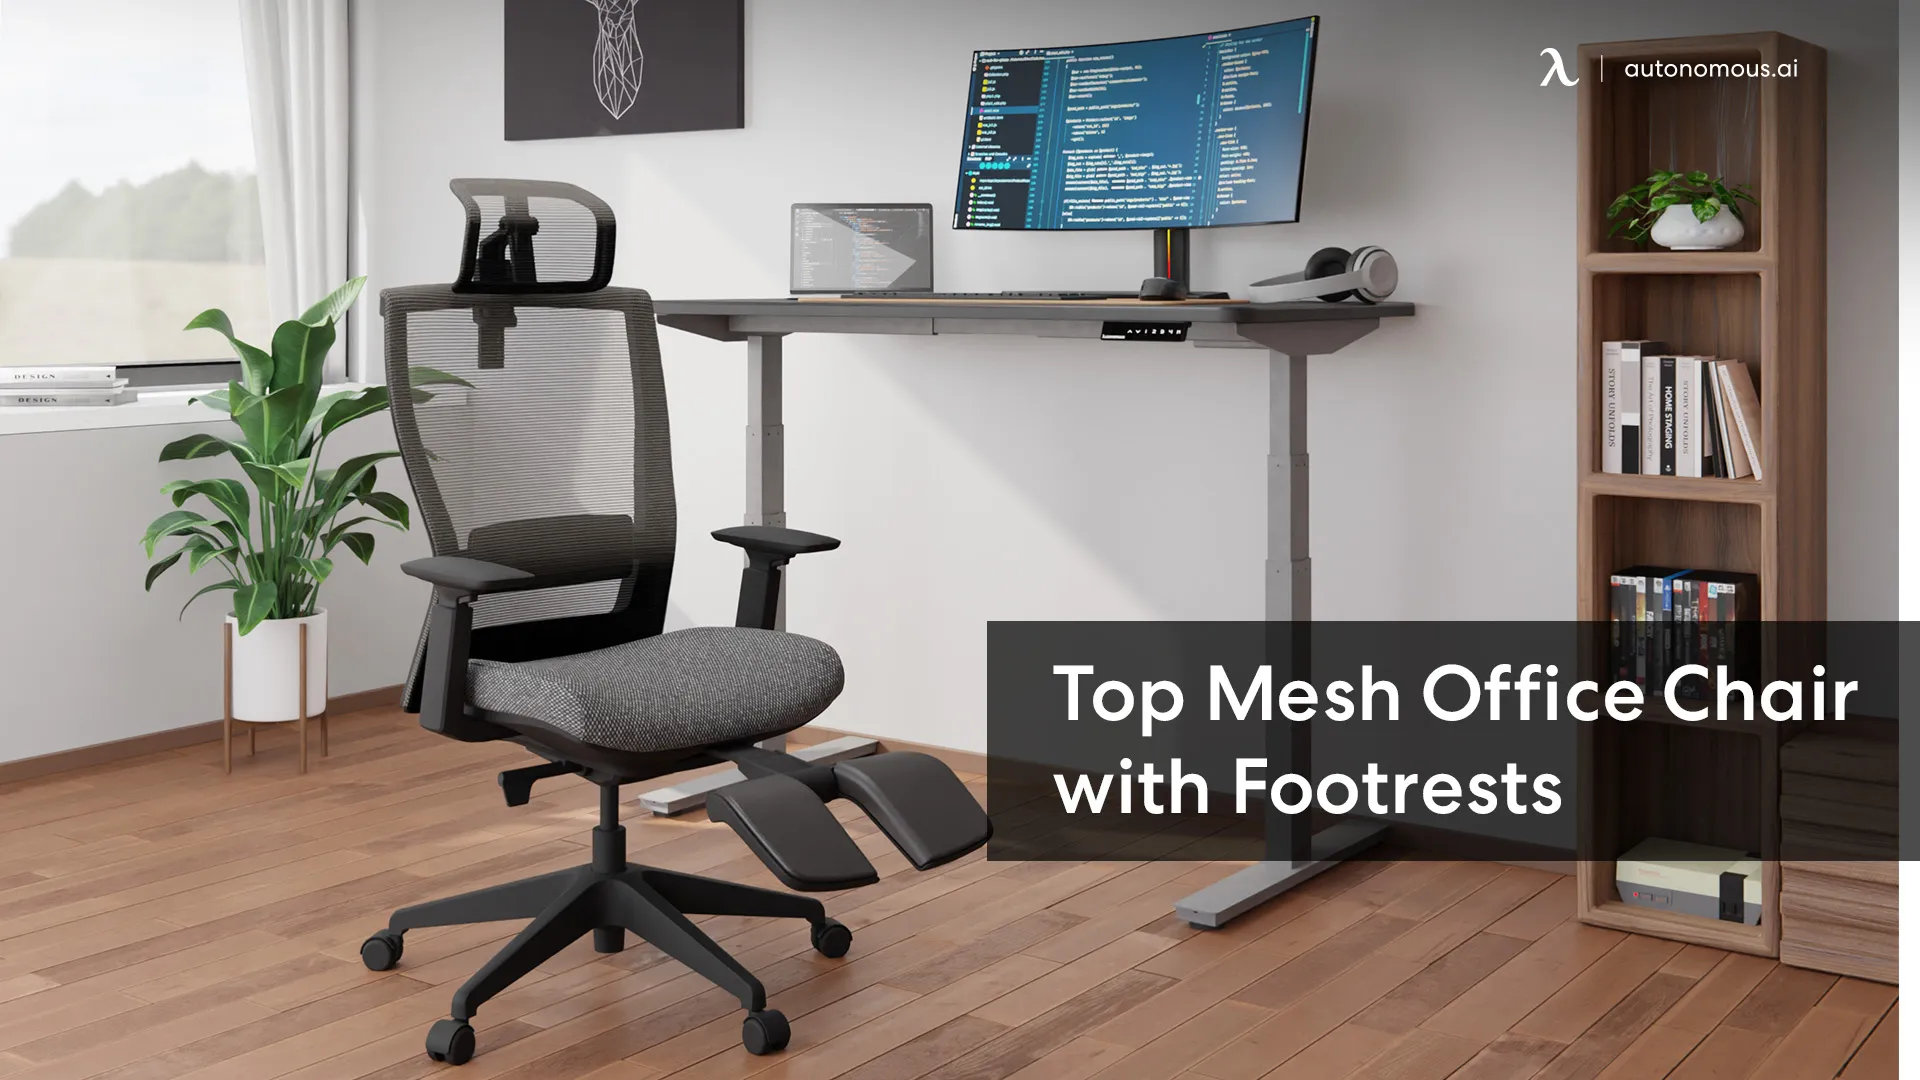 The Best Mesh Office Chairs with Footrest to Consider